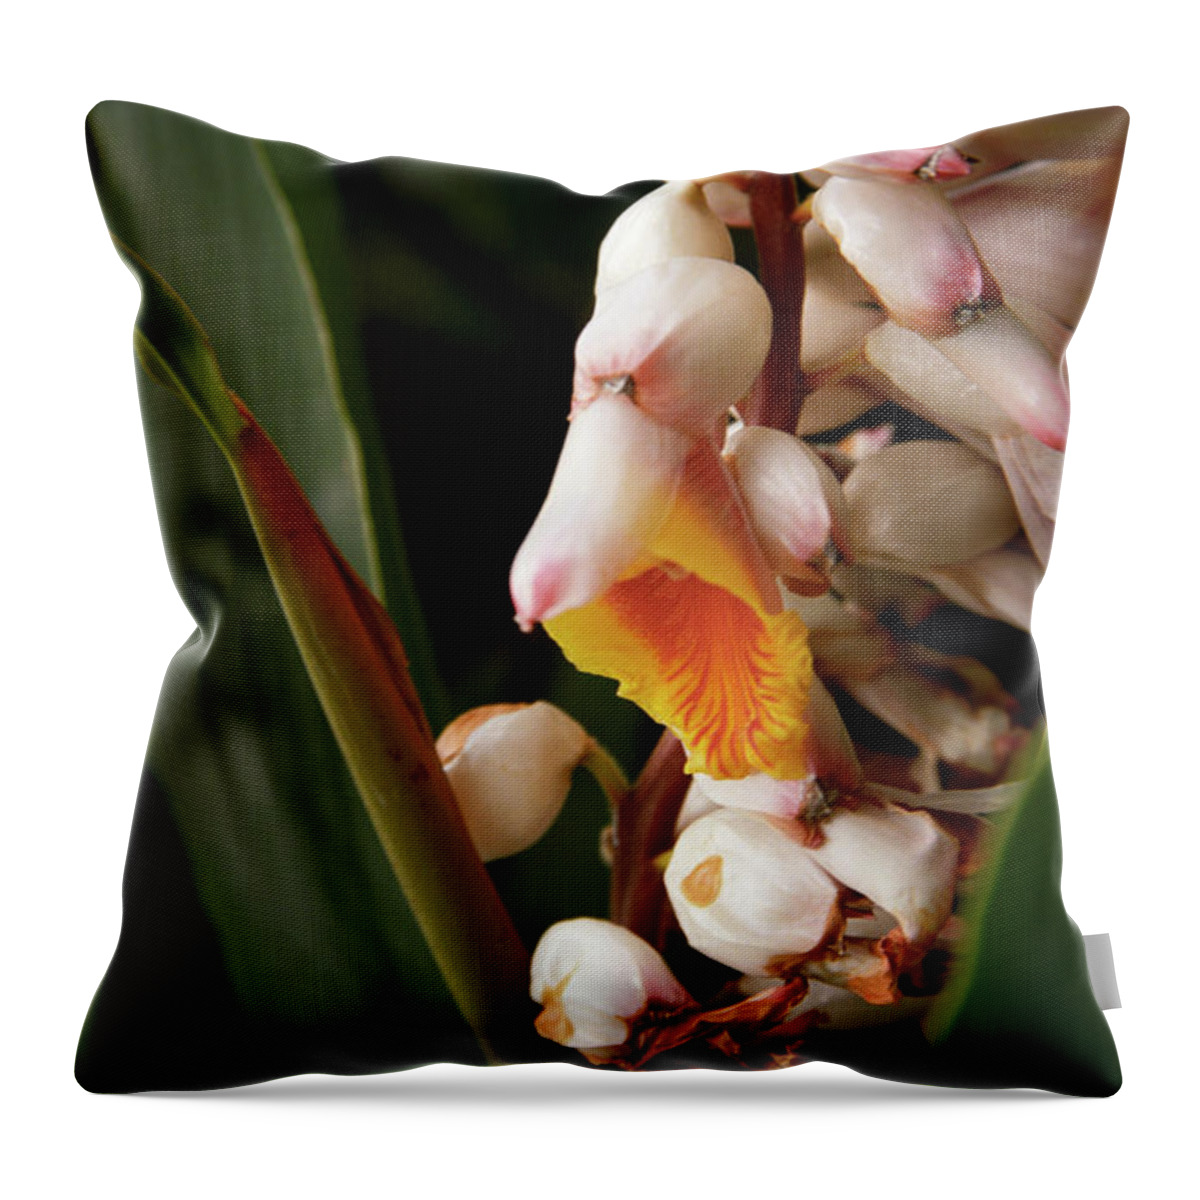 Flowers Throw Pillow featuring the photograph Shell Ginger by Kathy McClure